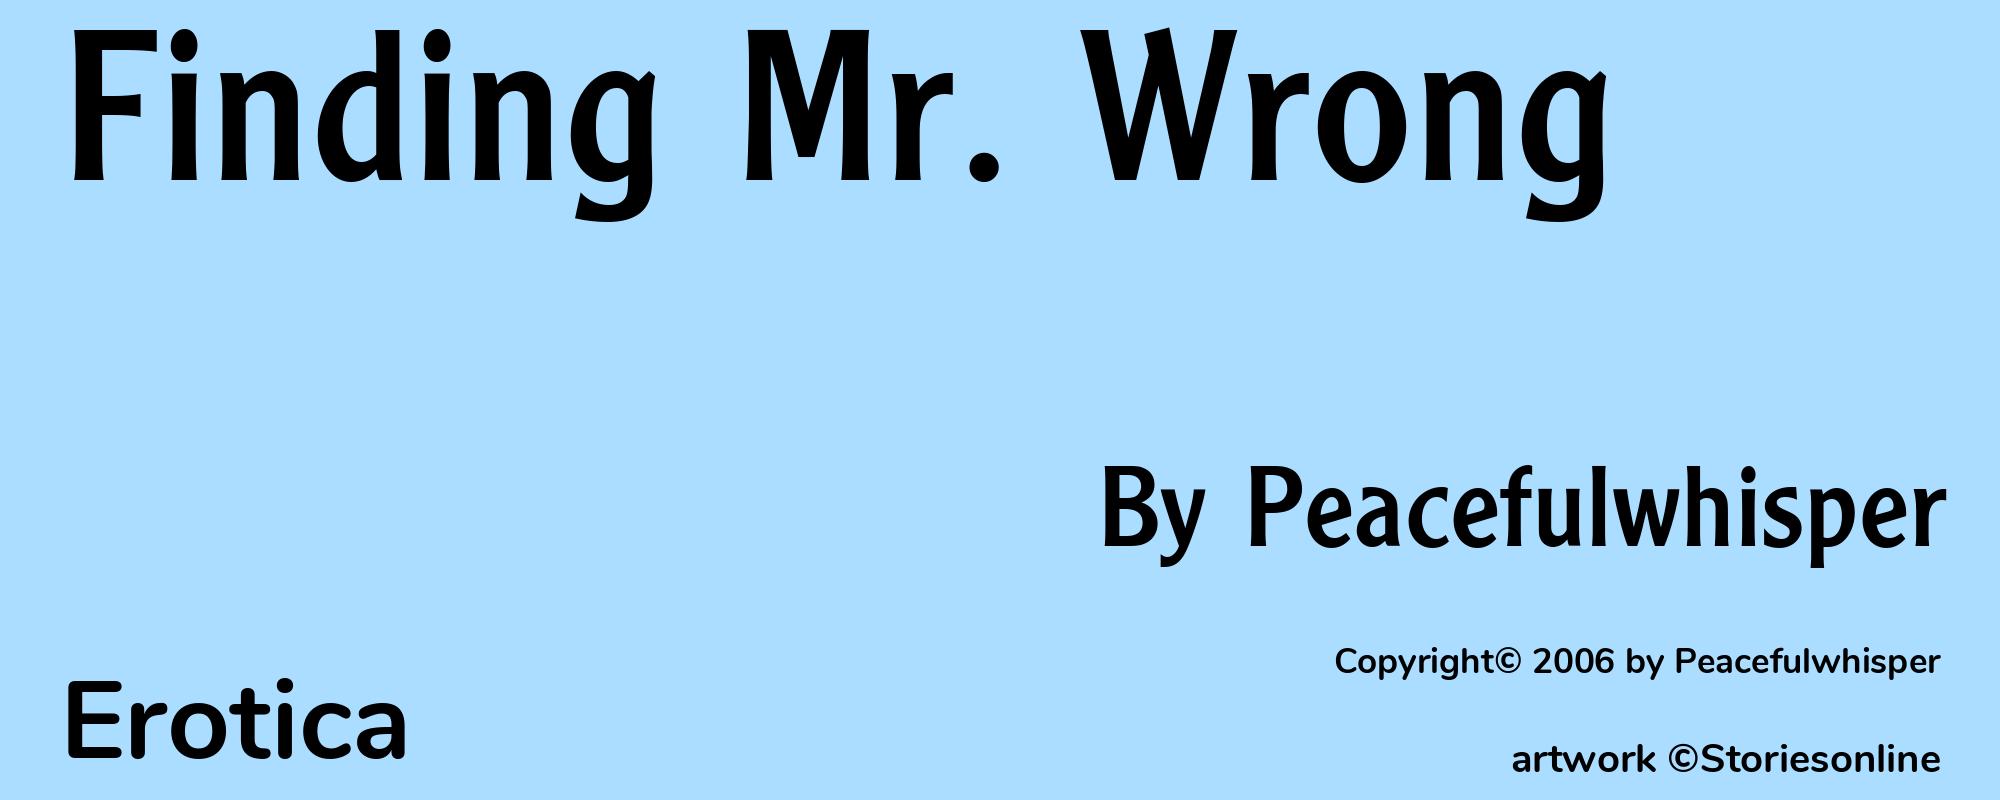 Finding Mr. Wrong - Cover